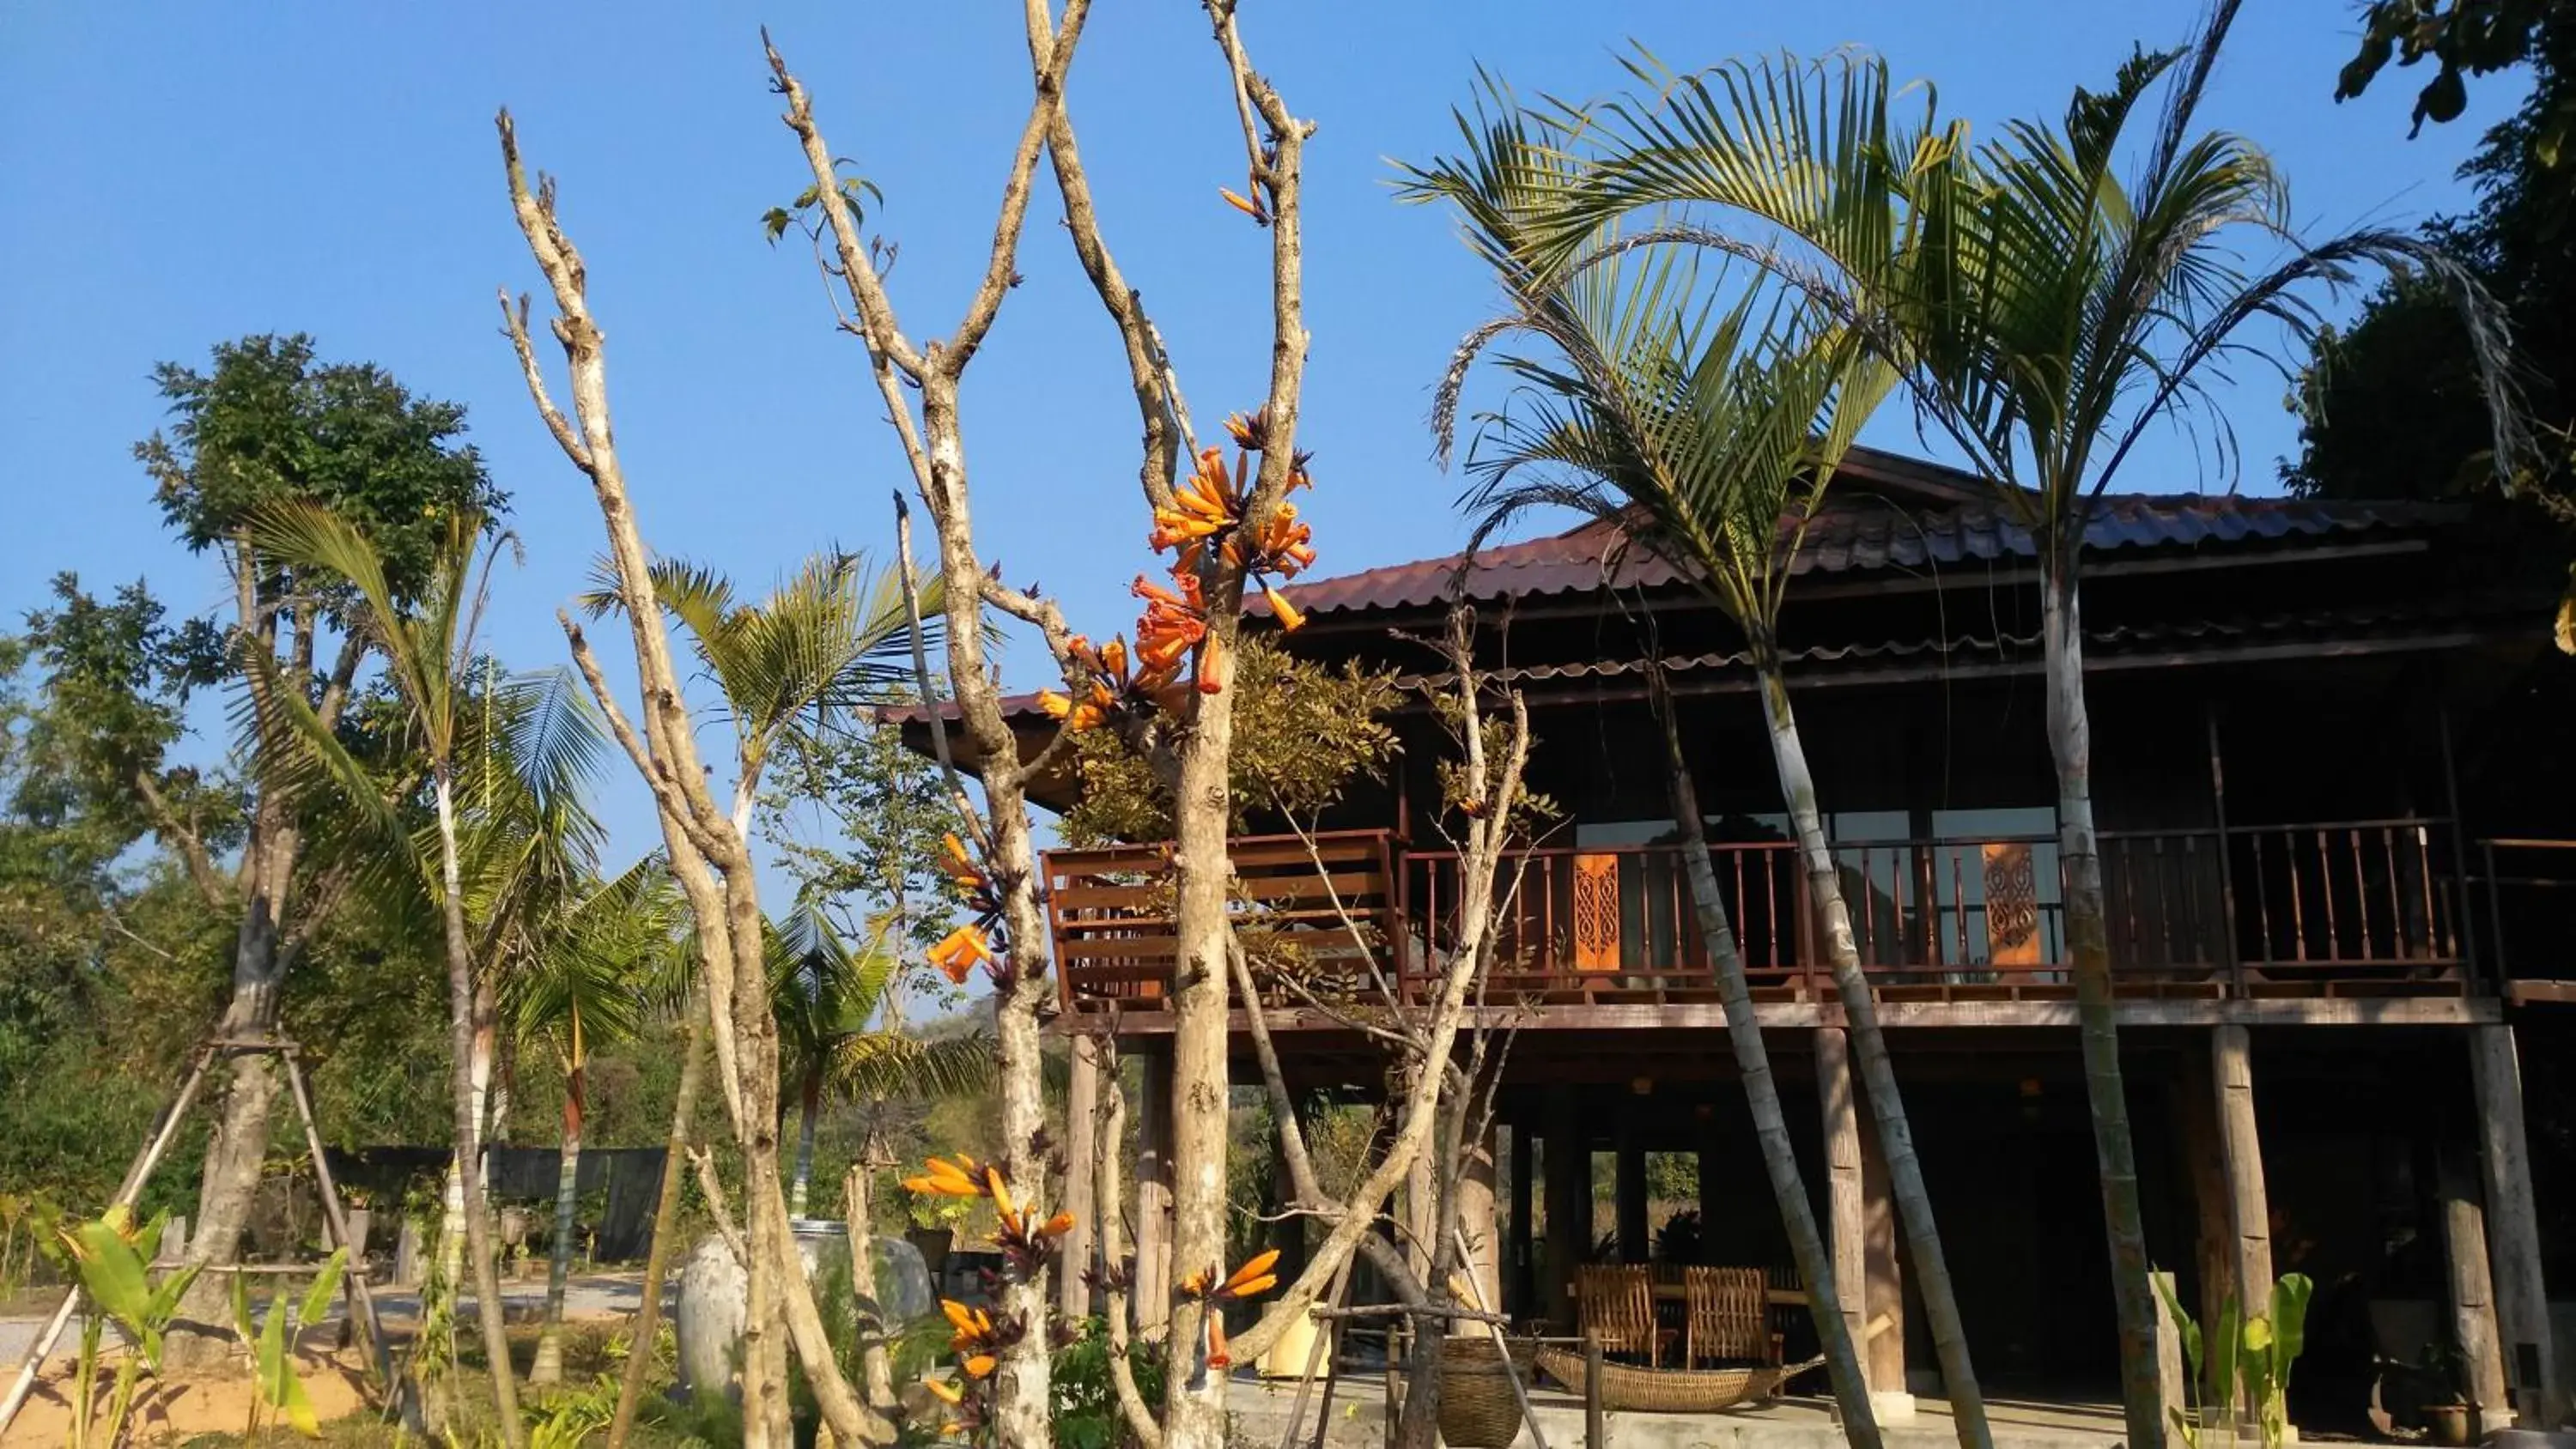 Property Building in Bambuh Boutique Homestay